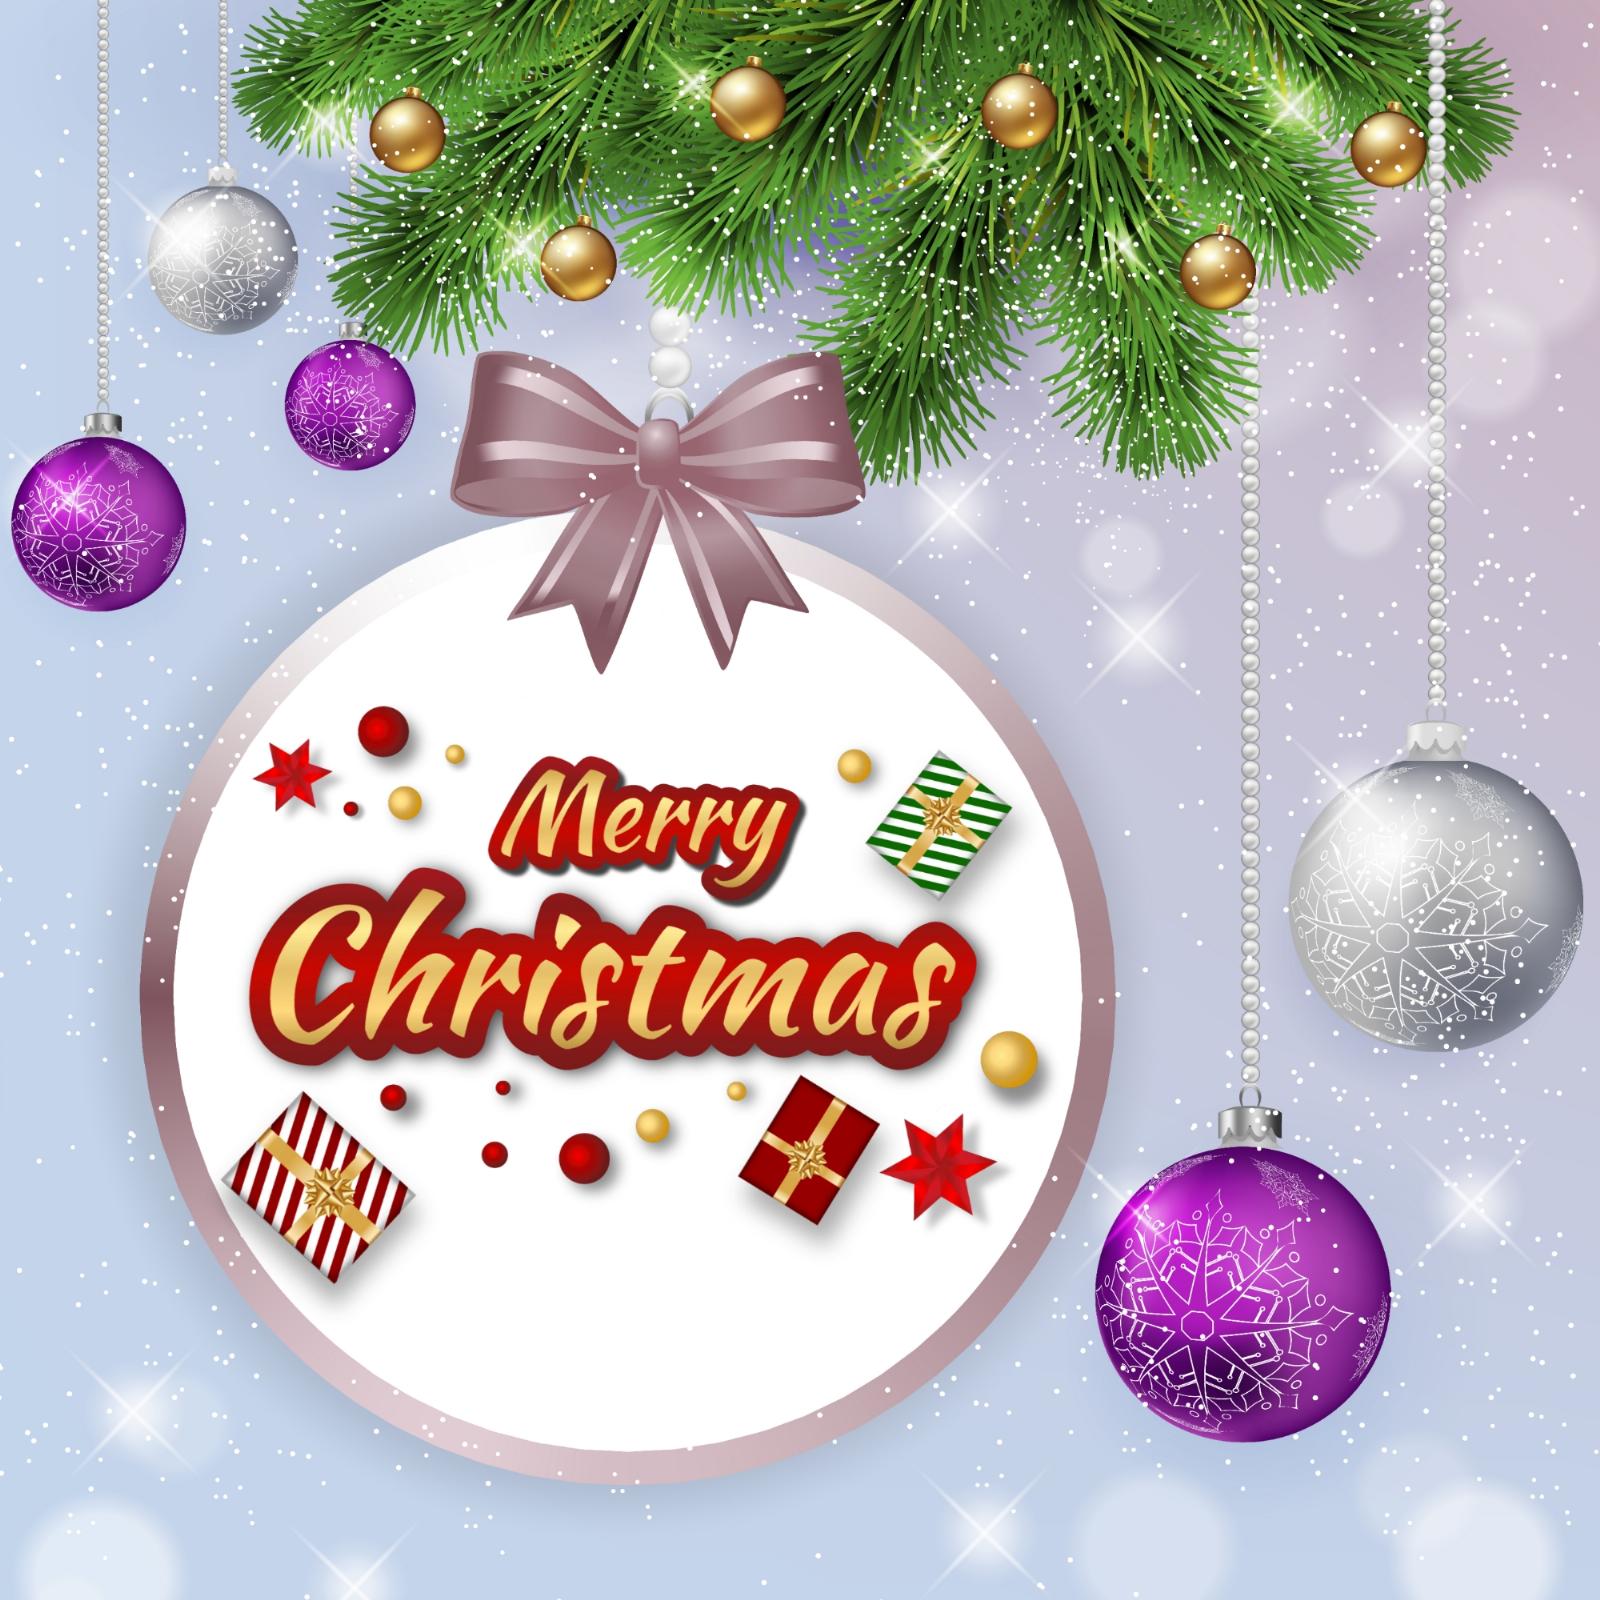 Merry Christmas Wishes 2022 Images